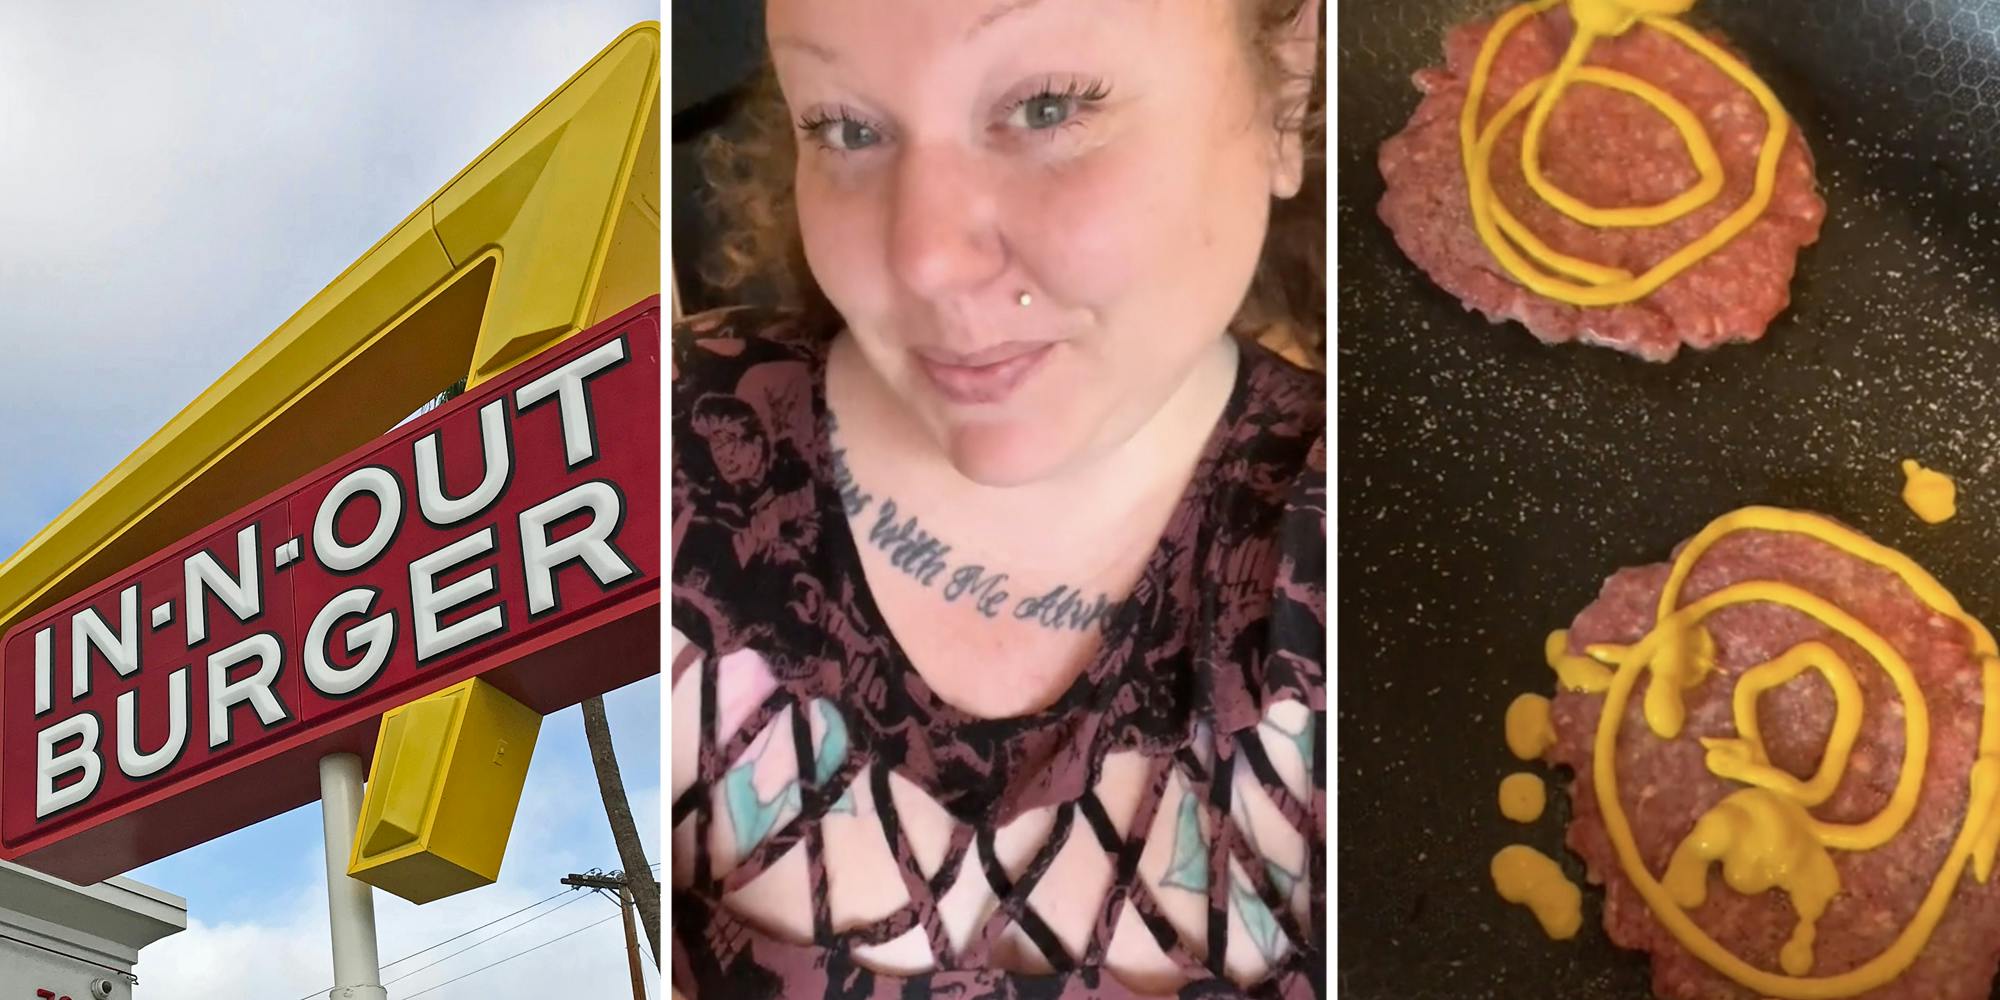 In-n-out Burger sign(l), Woman smiling(c), Burgers with mustard(r)